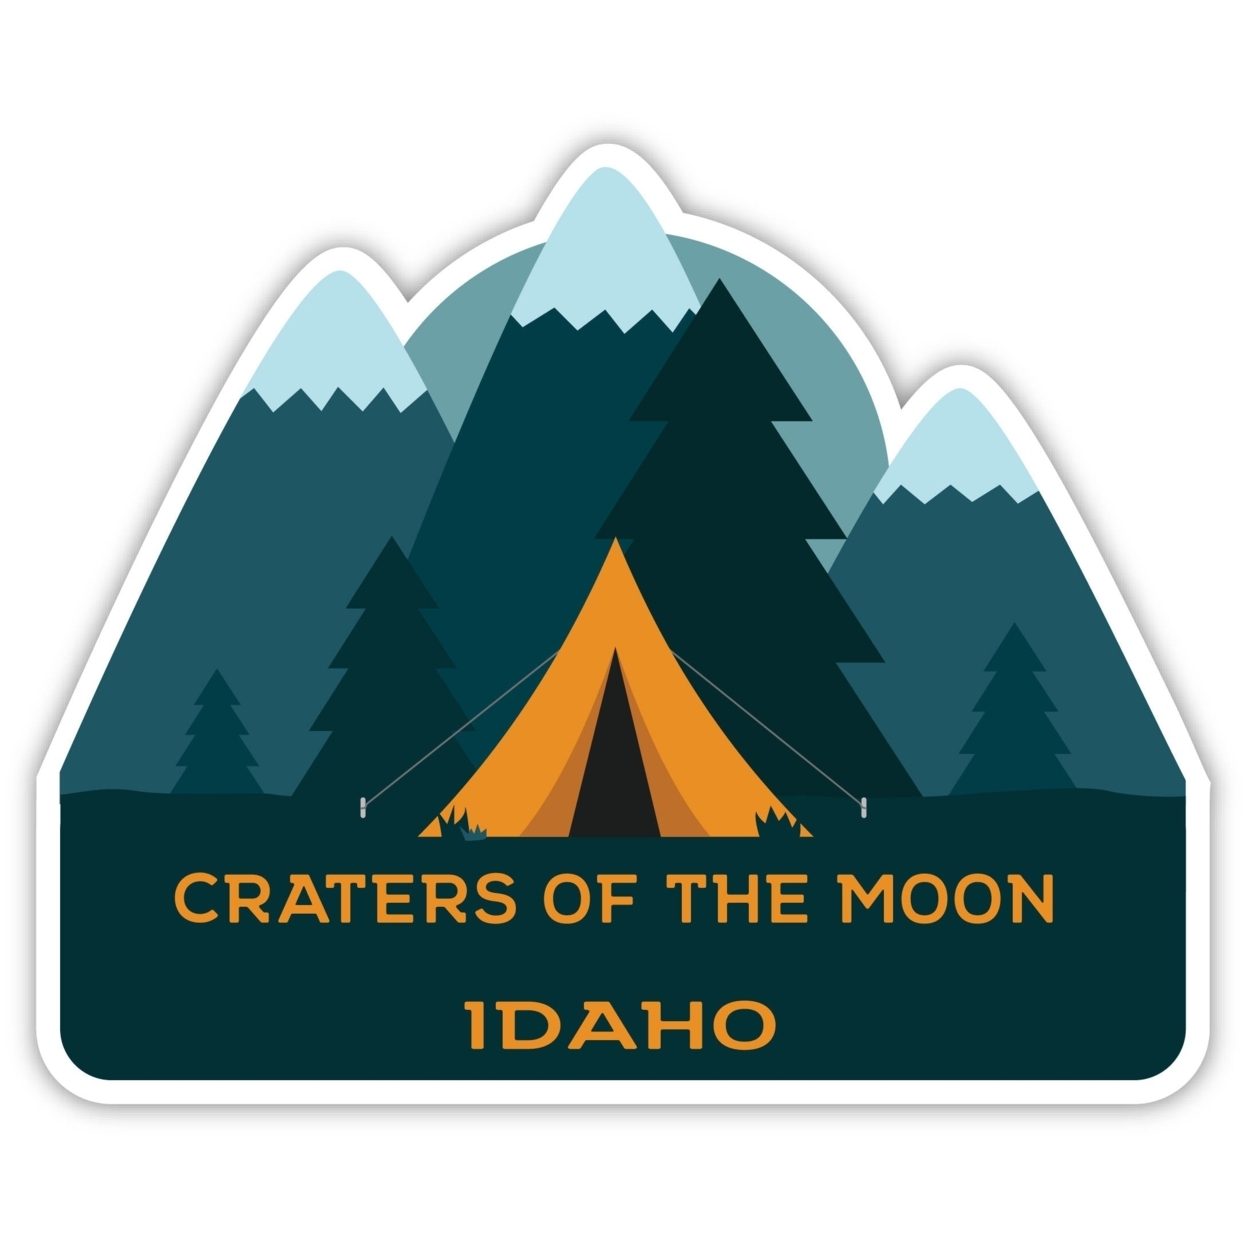 Craters Of The Moon Idaho Souvenir Decorative Stickers (Choose Theme And Size) - 4-Pack, 10-Inch, Tent